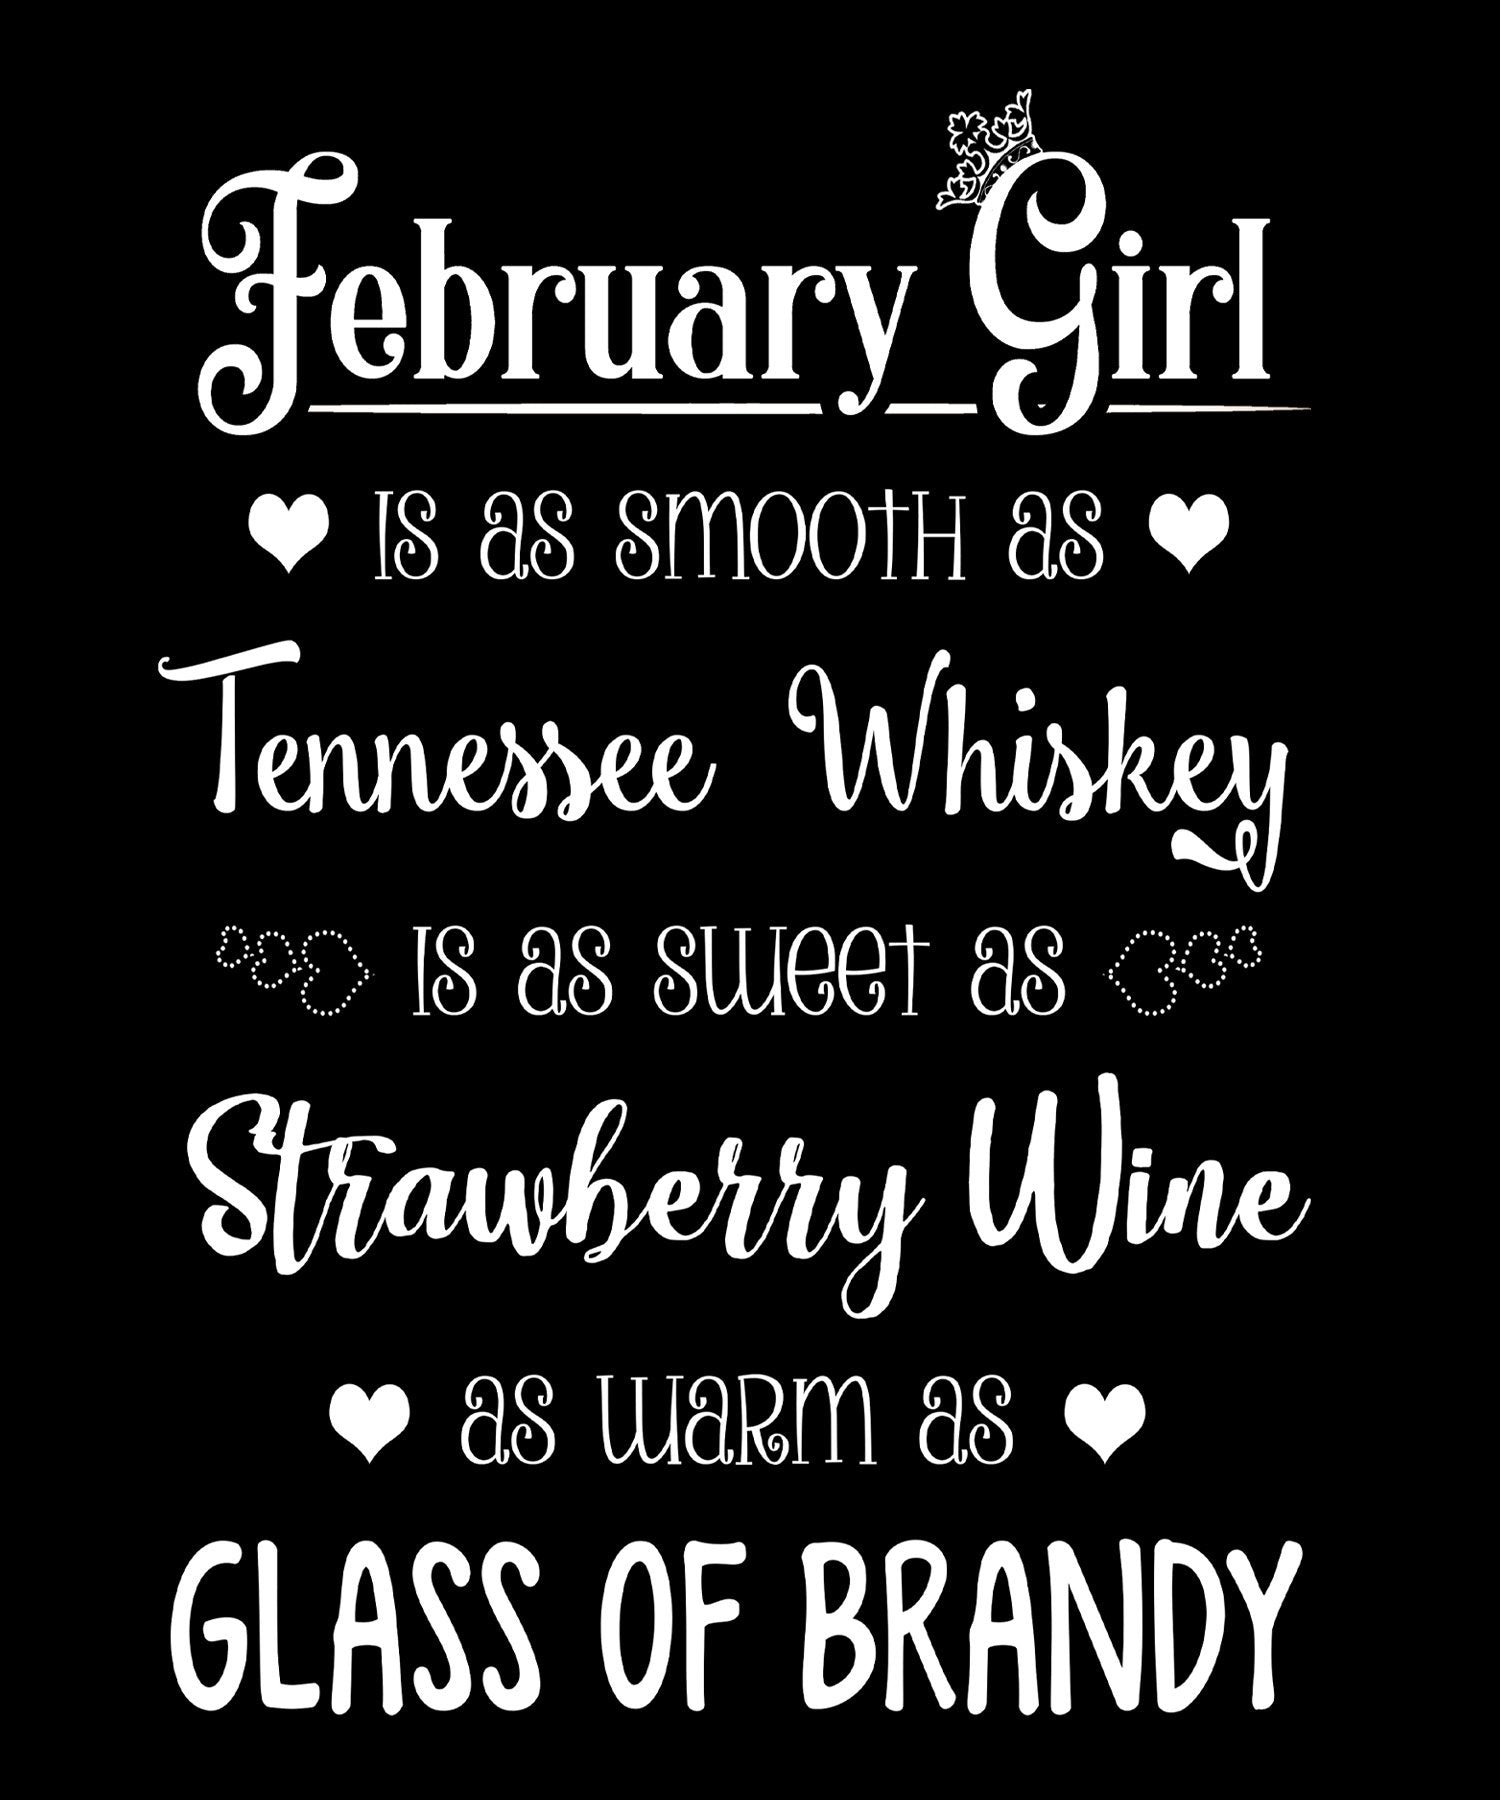 "February Girl Is As Smooth As Whiskey.........As Warm As Brandy"